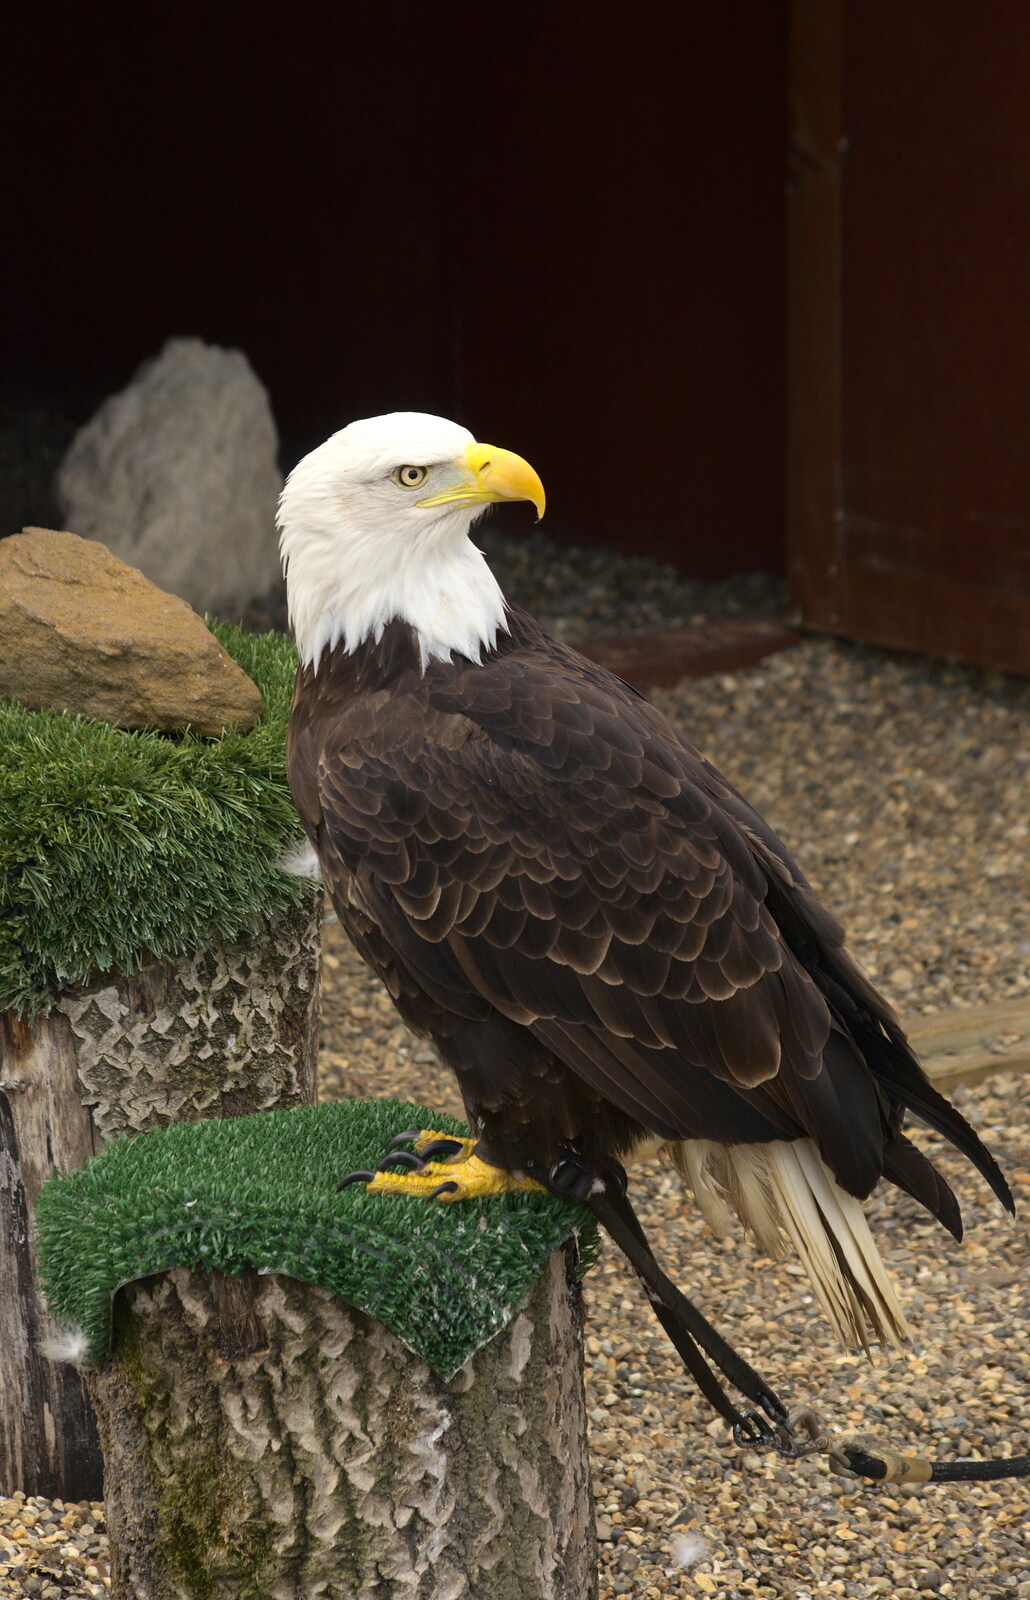 Sam the bald eagle from Another Trip to Banham Zoo, Banham, Norfolk - 25th March 2016